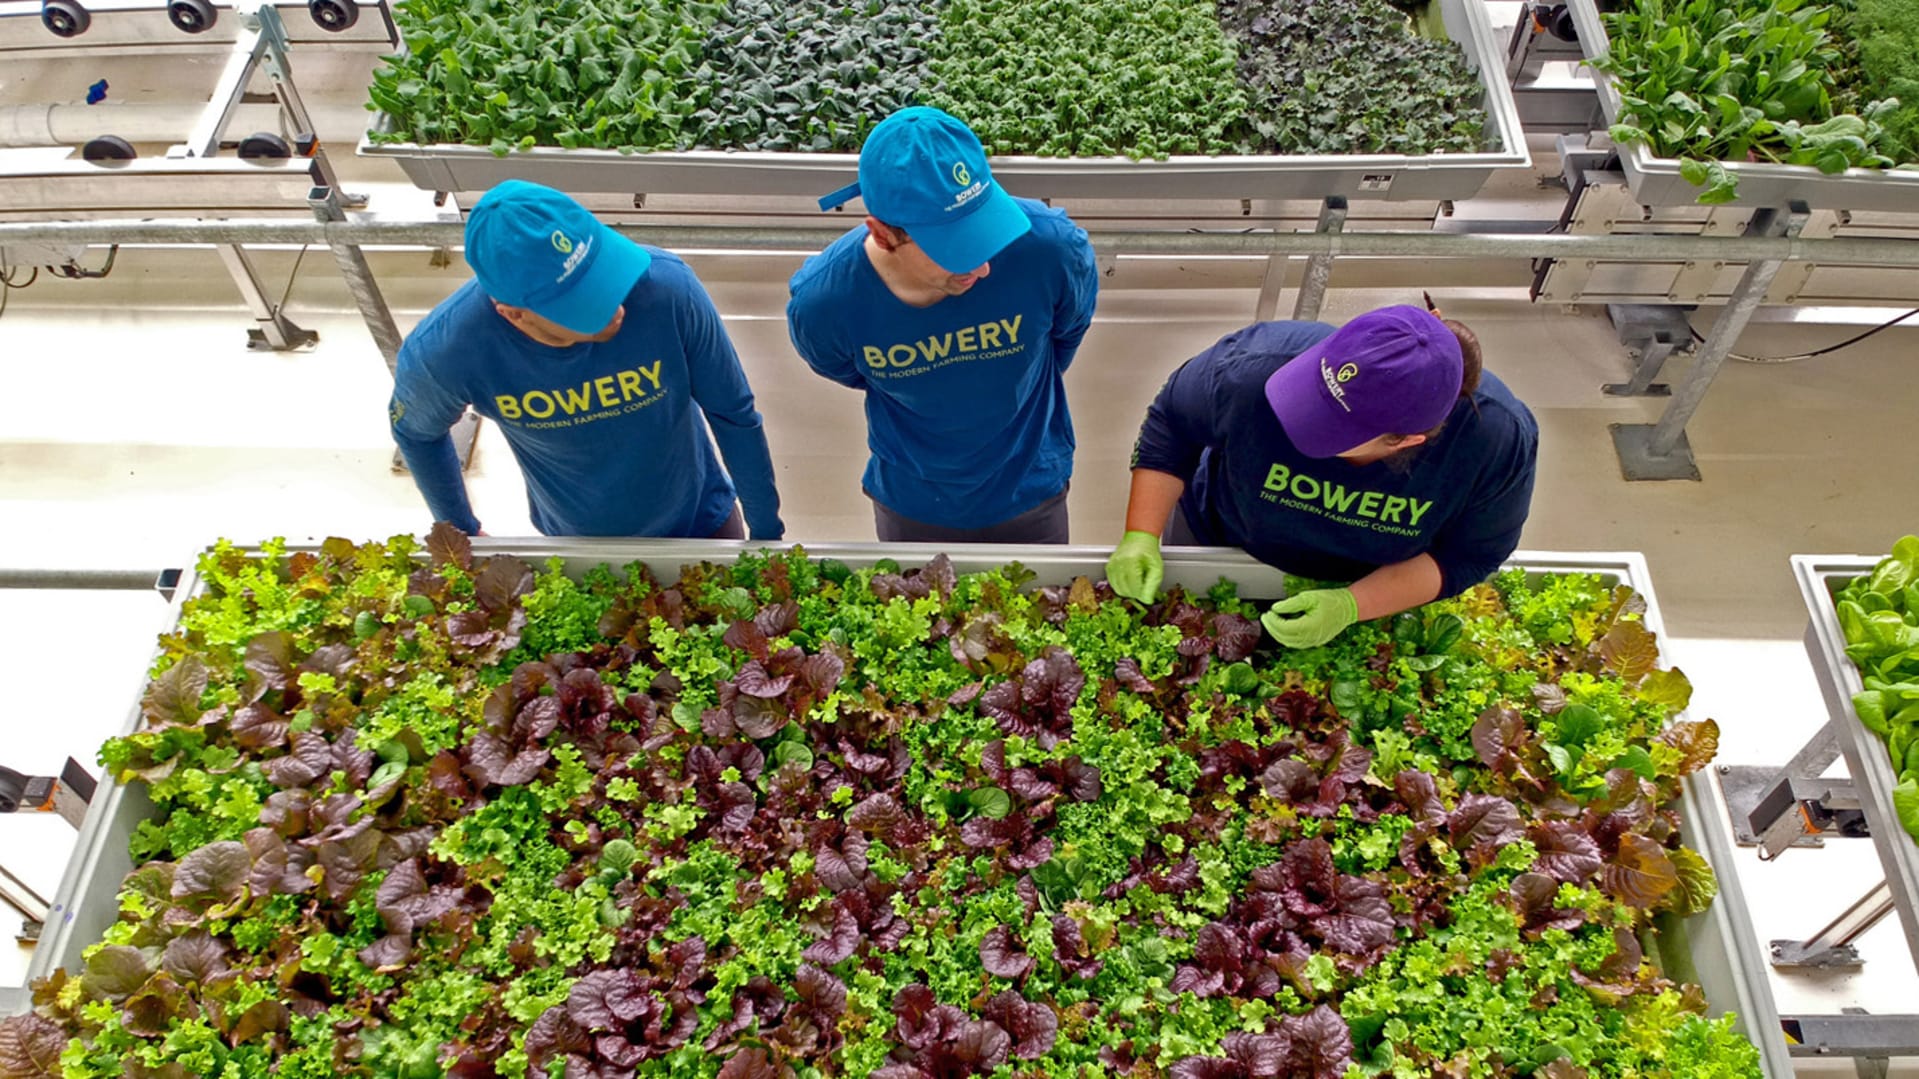 This Google Ventures-backed indoor farming startup just opened its biggest farm yet